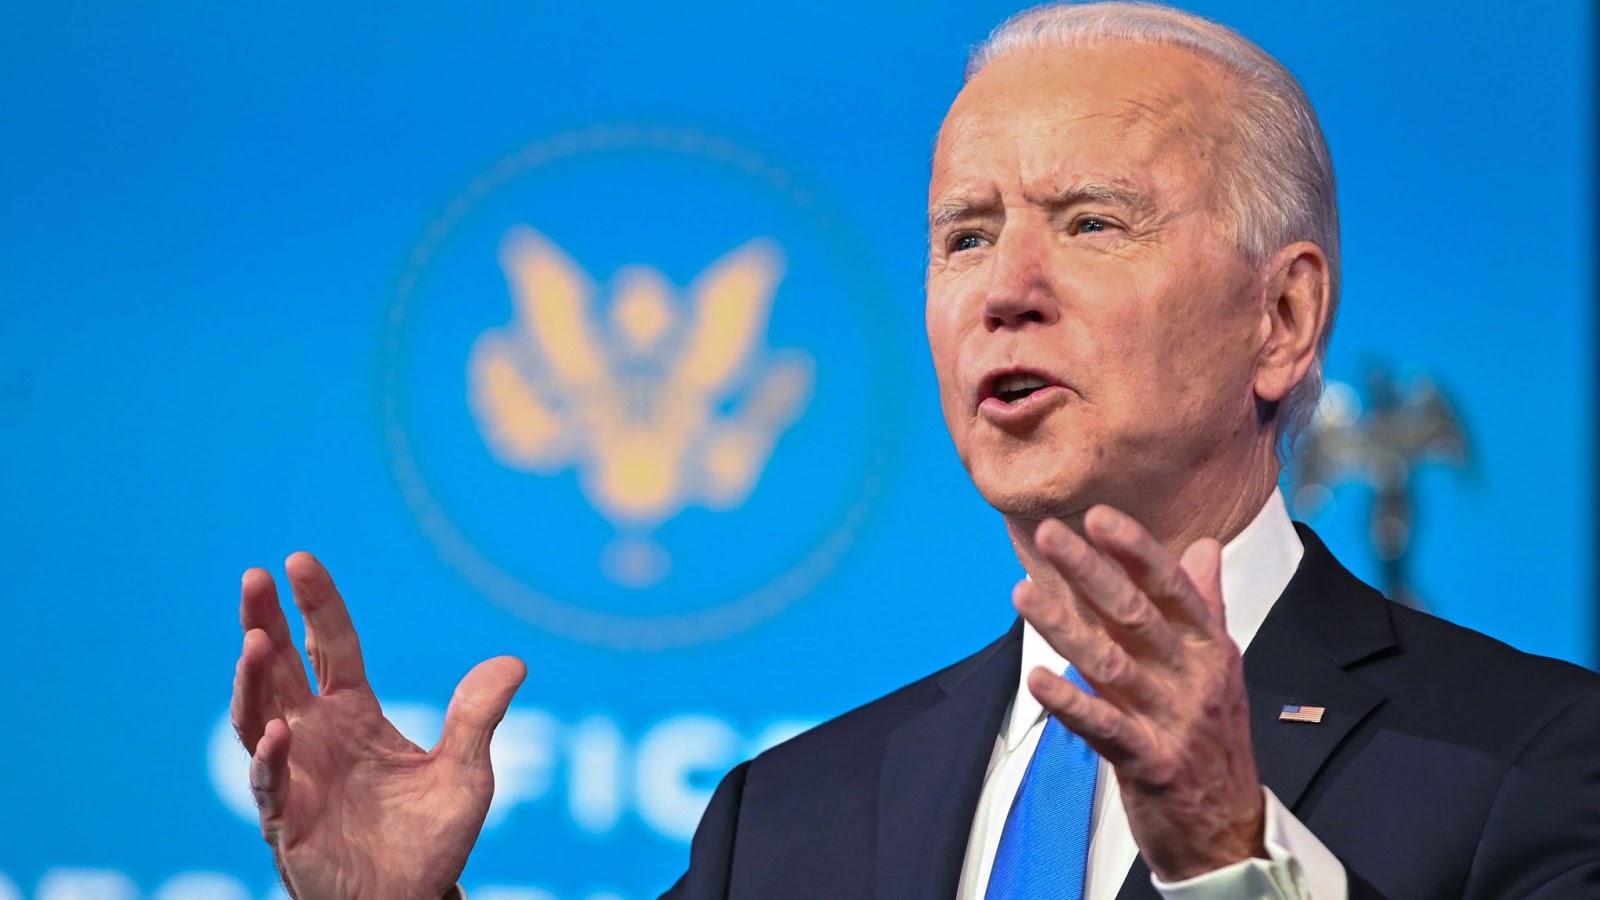 Biden lashes out at Trump after election win confirmed